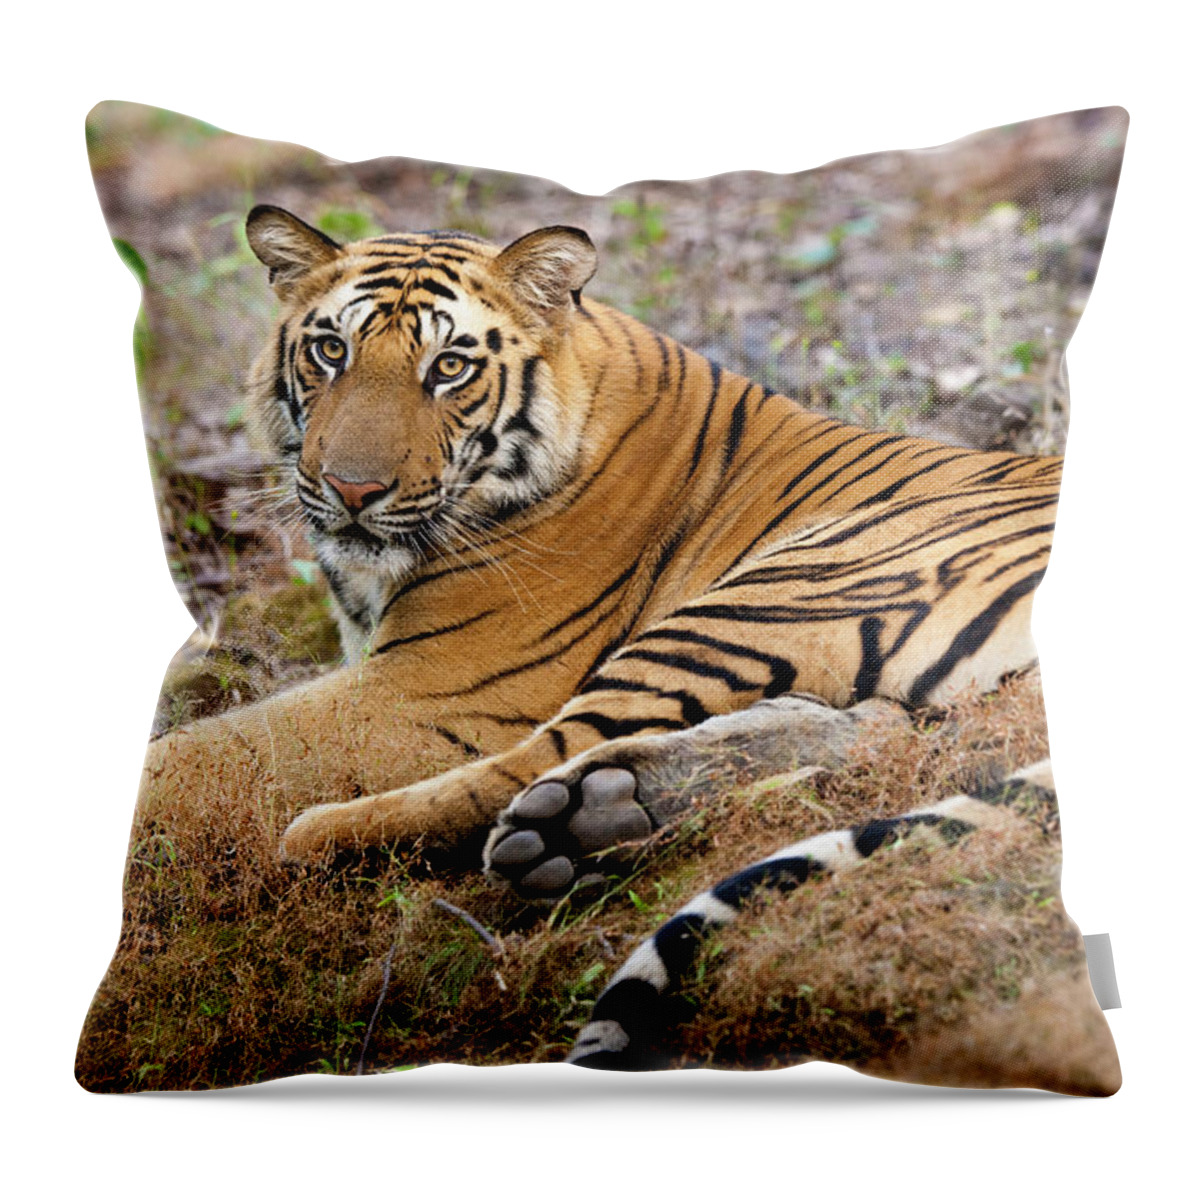 Looking Over Shoulder Throw Pillow featuring the photograph An Adult Tiger In Bandhavgarh National #1 by Mint Images - Art Wolfe